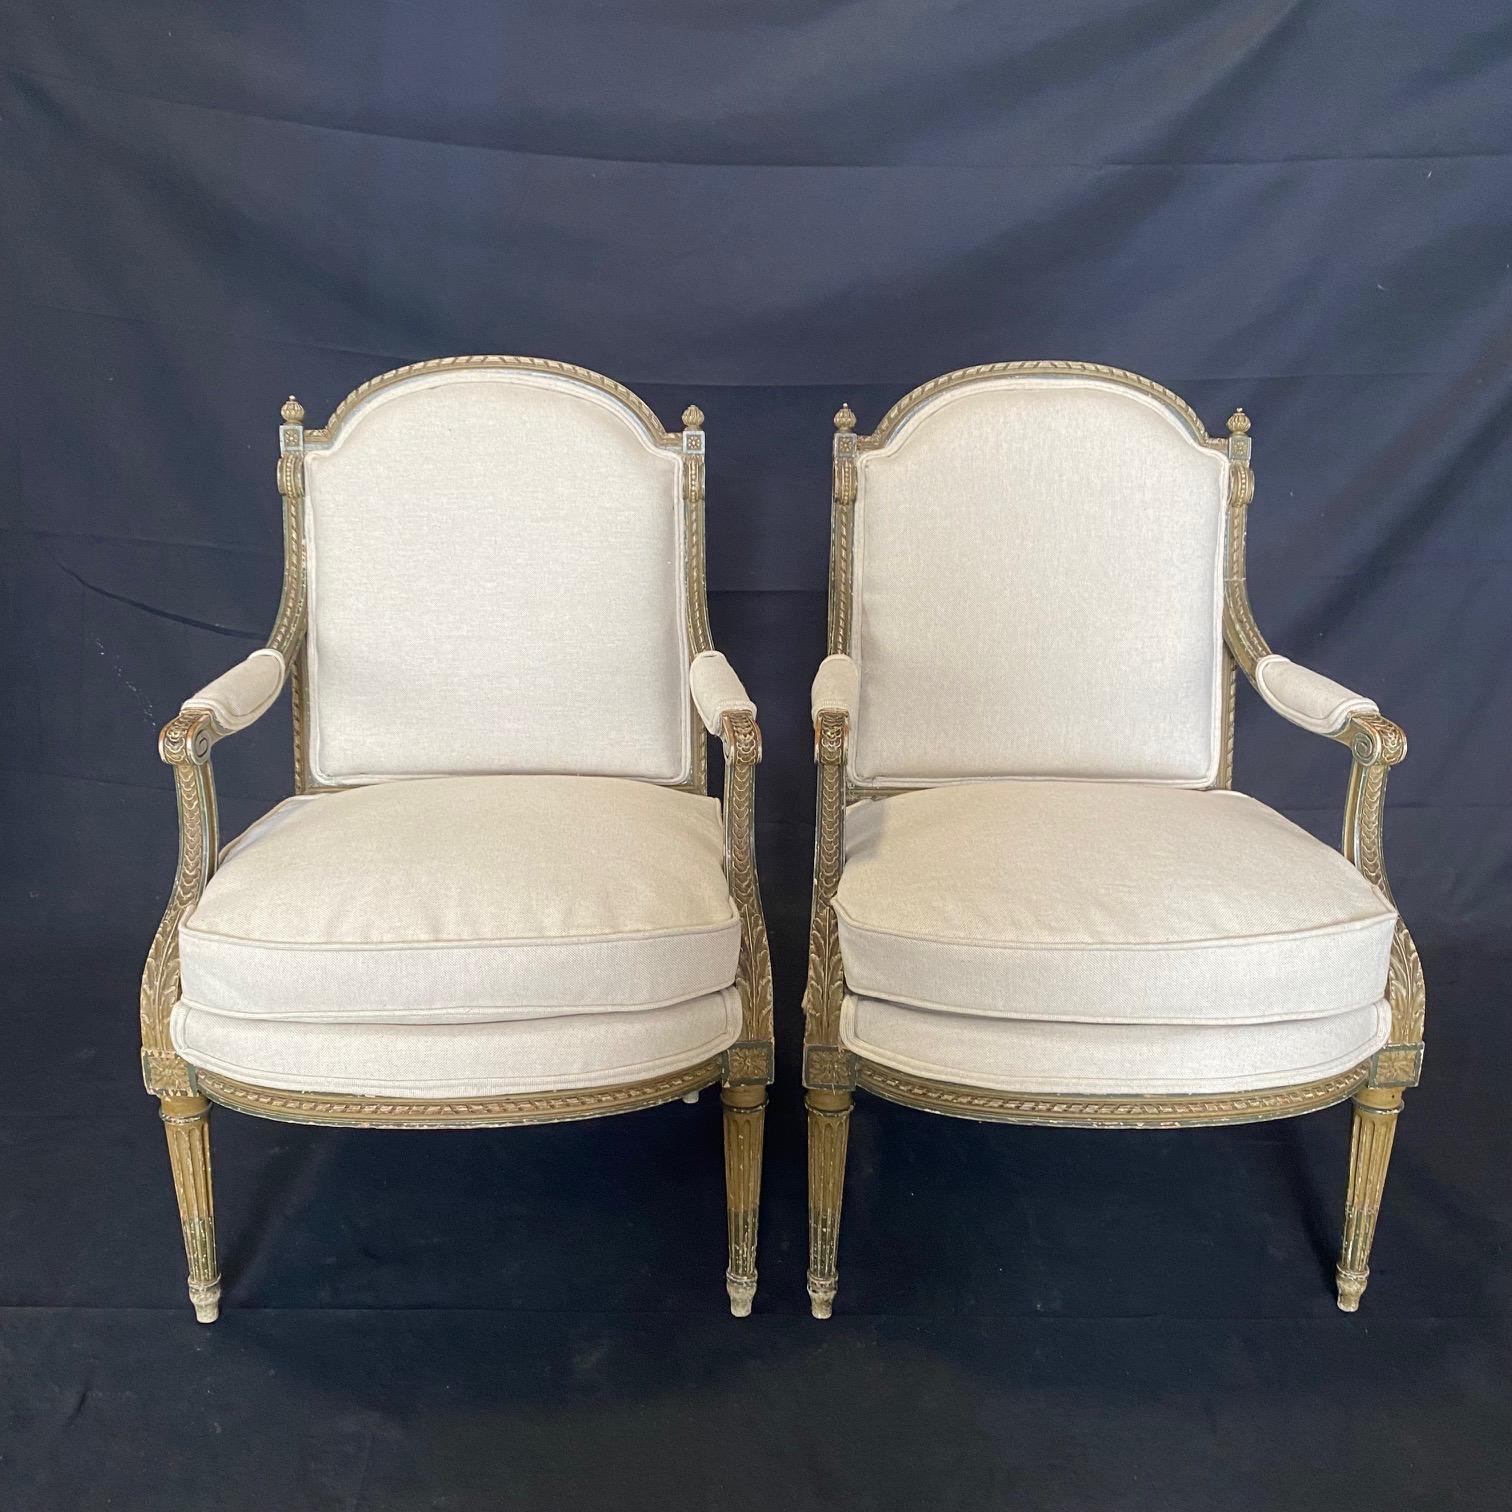 Gorgeous and sturdy French 19th century sofa and pair of armchairs fauteuils, all newly reupholstered in a neutral high quality linen cotton blend that accents the detail in the Louis XVI classic form with stunning carved fluting to the backs, arm